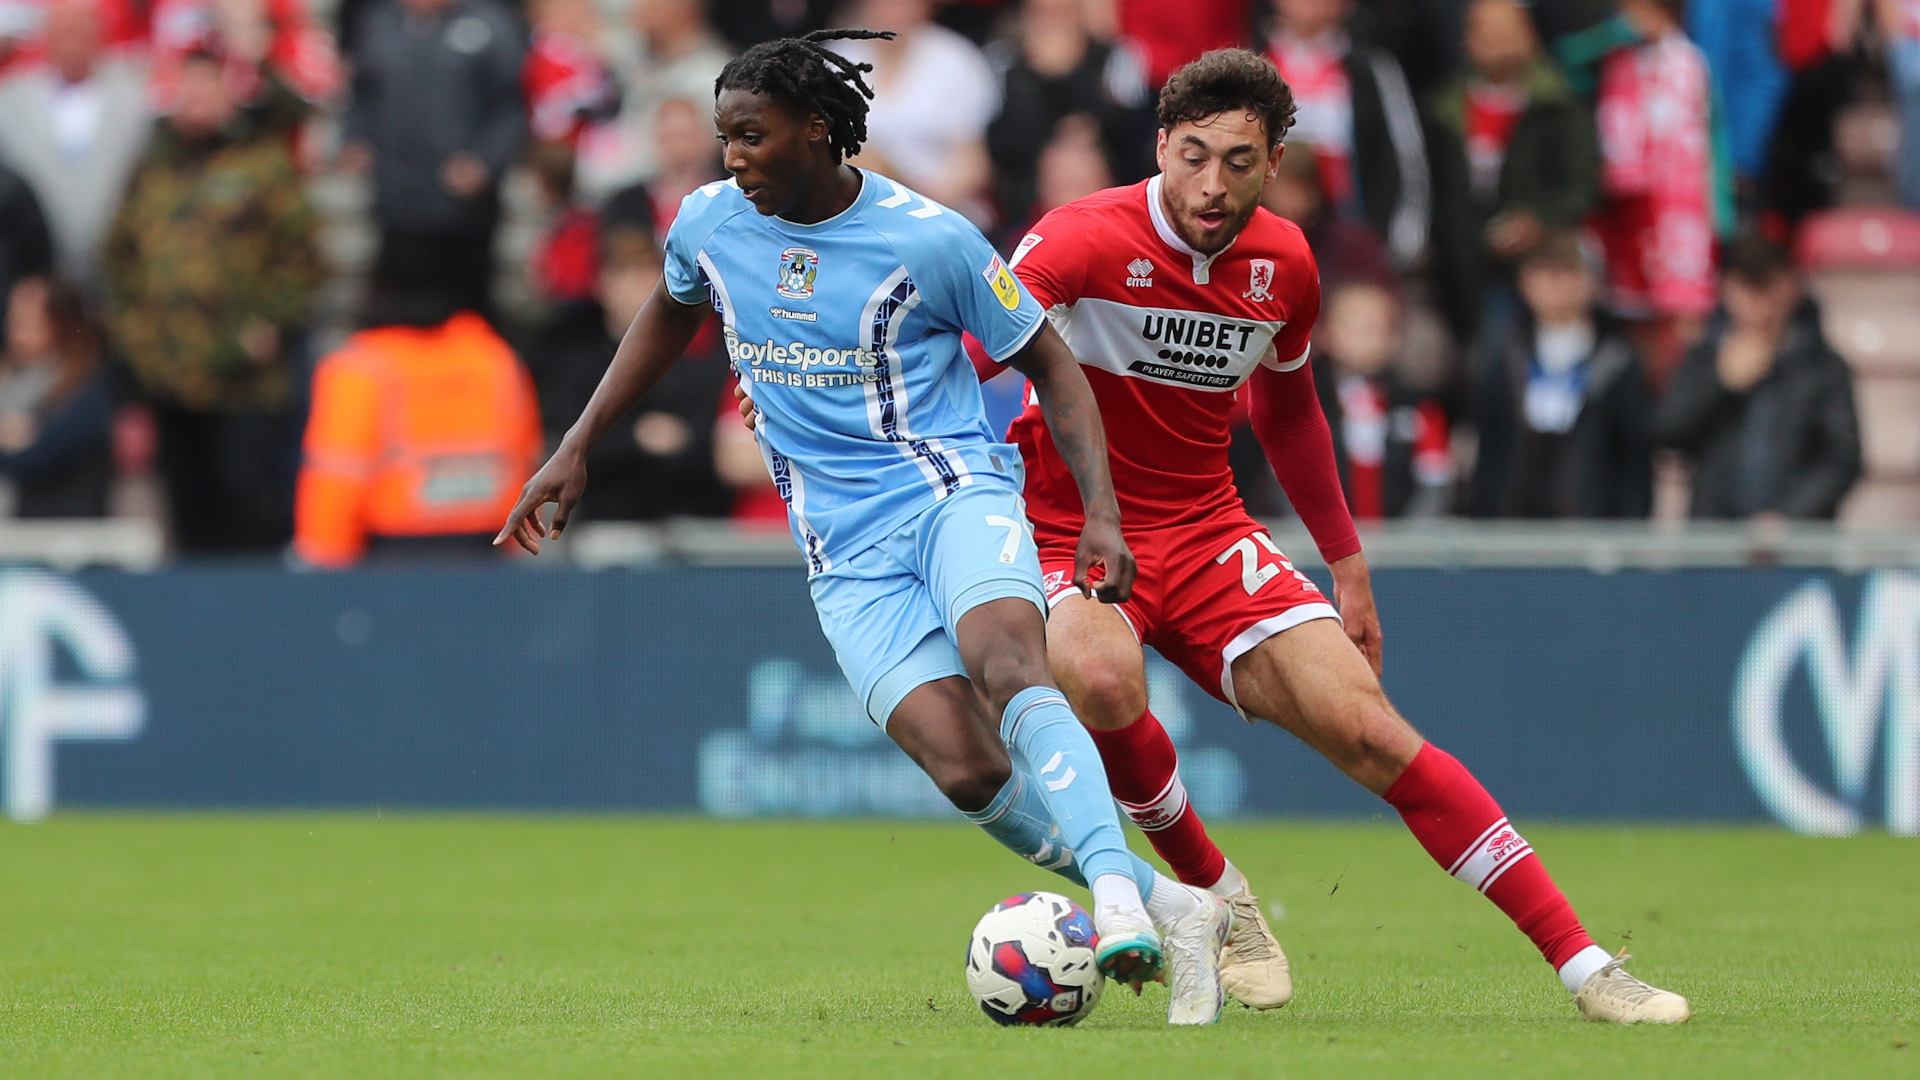 Coventry vs Middlesbrough live stream how to watch the playoff semi-final first leg online